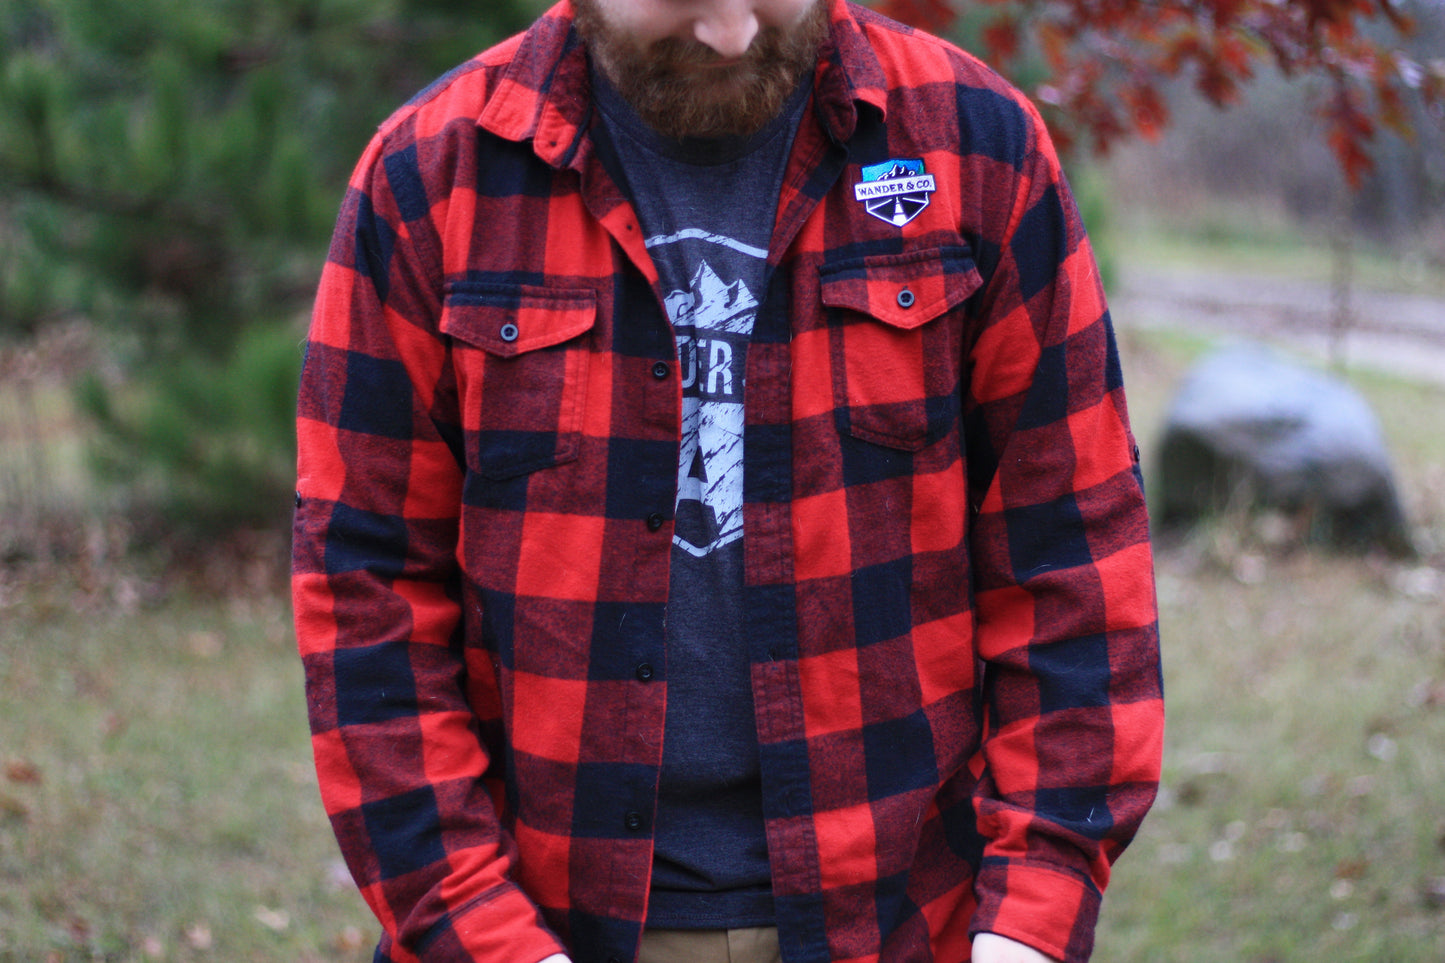 Wander & Co. Red Flannel